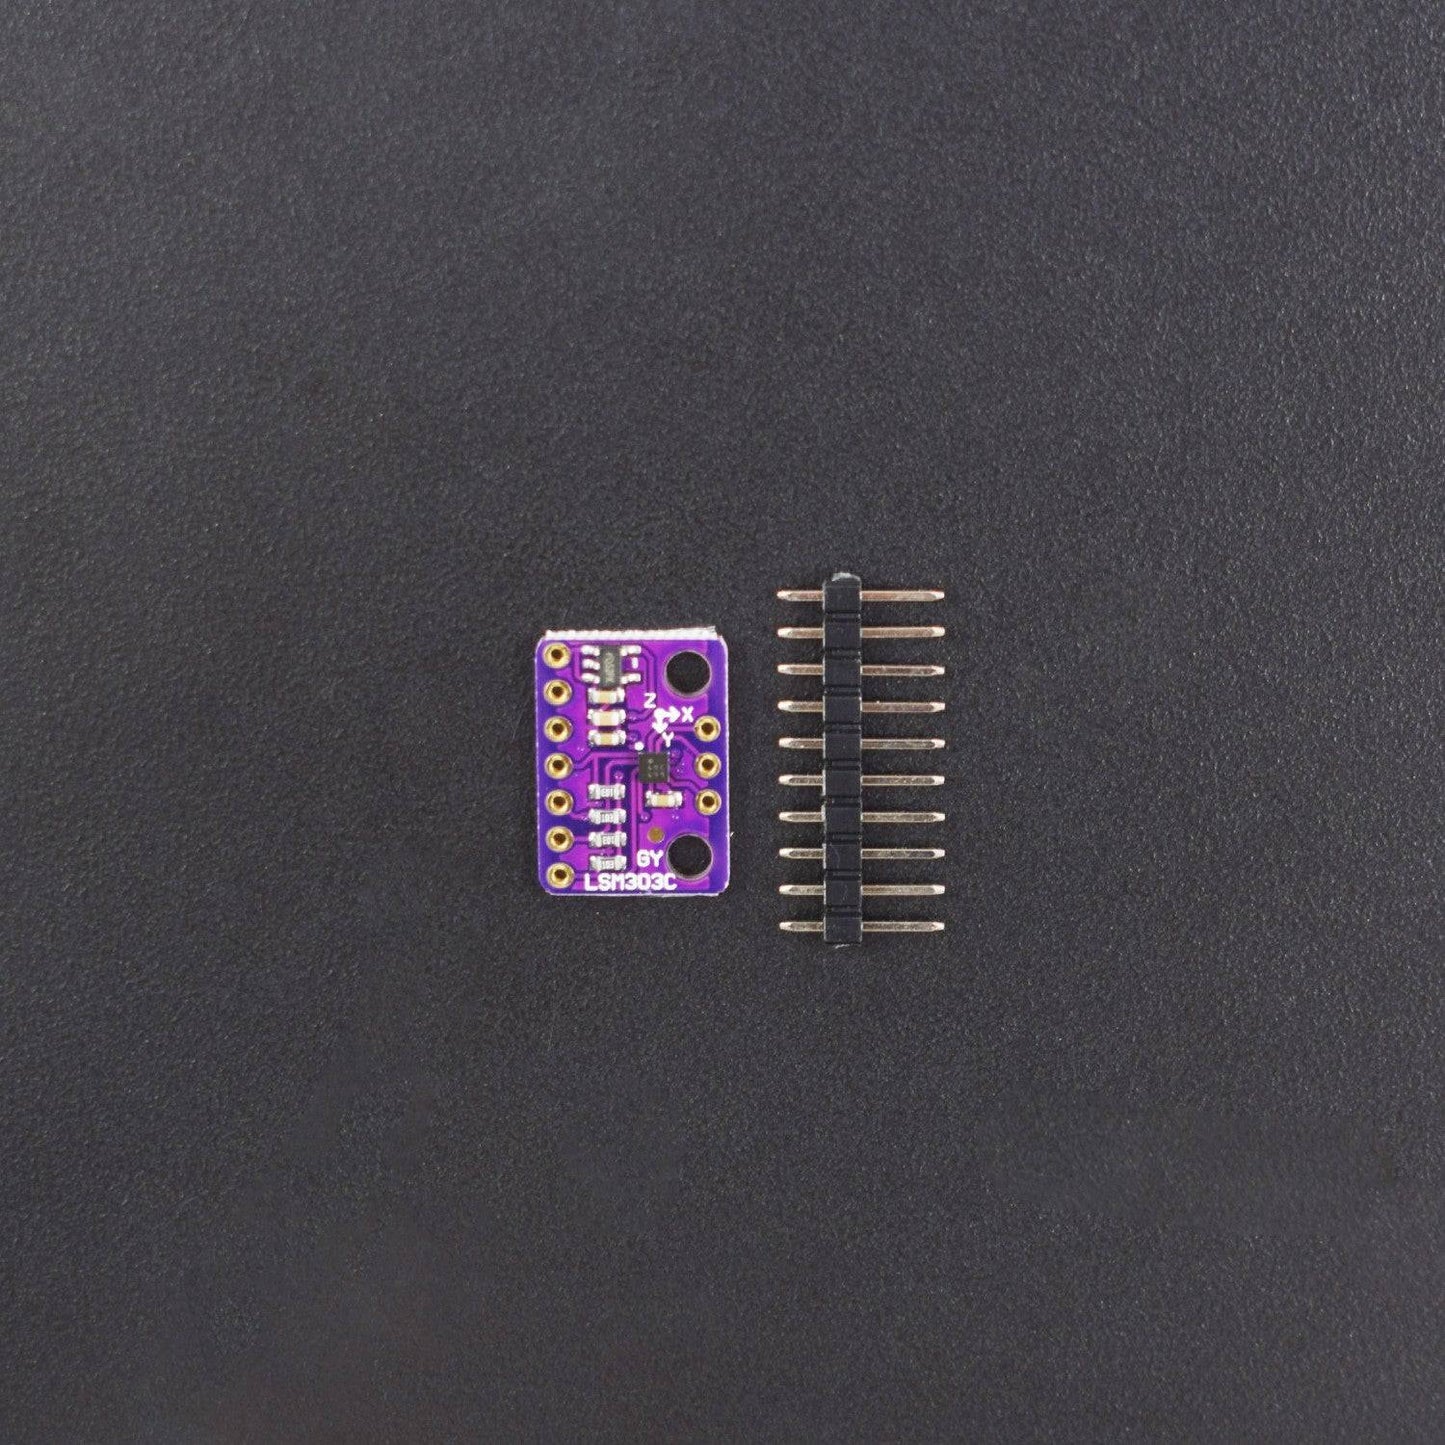 LSM303C Three-Axis Magnetic Field Acceleration Sensor Module LIS3MDL Magnetometer-RS1047 - REES52